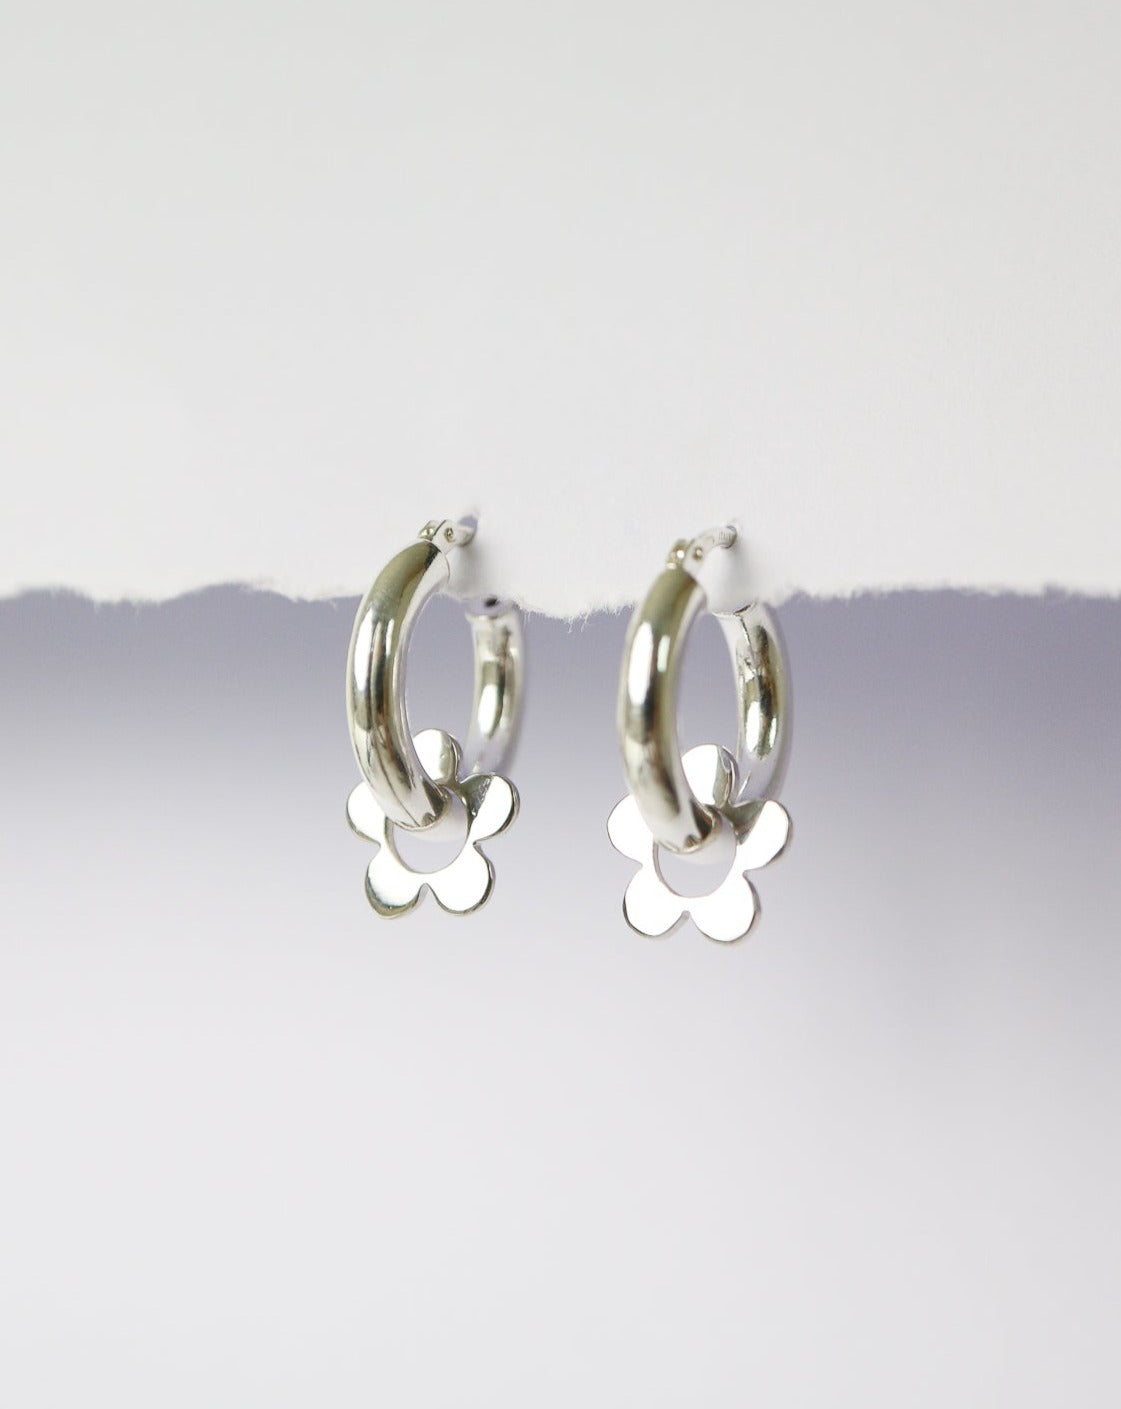 Silver hoops earrings with silver daisy flower charms